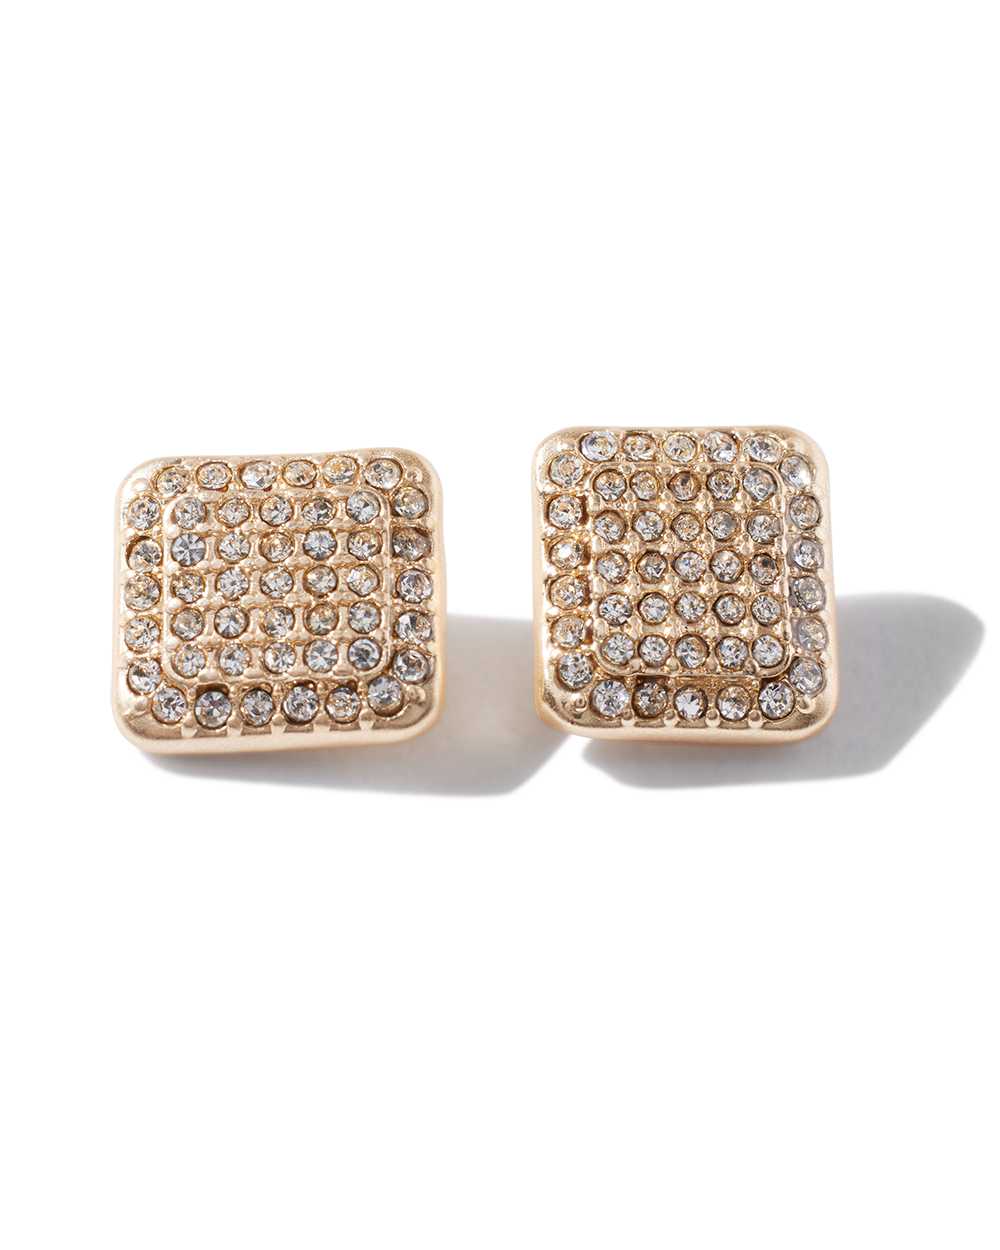 Gold Pave Crystal Stud Earrings click to view larger image.